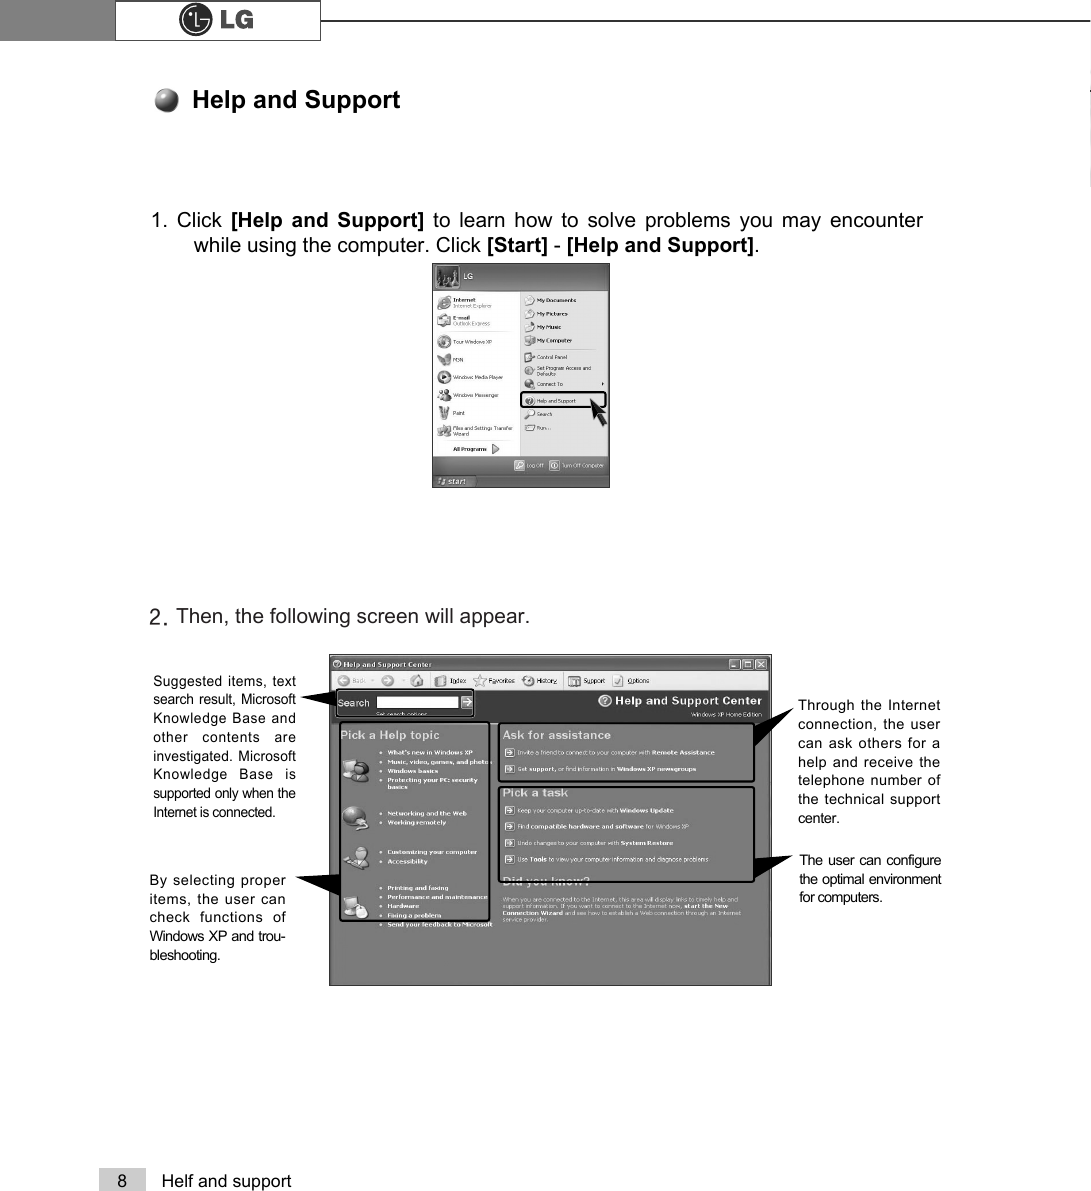 8 Helf and support1. Click [Help and Support] to learn how to solve problems you may encounterwhile using the computer. Click [Start] - [Help and Support].Help and SupportThen, the following screen will appear.Suggested items, textsearch result, MicrosoftKnowledge Base andother contents areinvestigated. MicrosoftKnowledge Base issupported only when theInternet is connected.By selecting properitems, the user cancheck functions ofWindows XP and trou-bleshooting.Through the Internetconnection, the usercan ask others for ahelp and receive thetelephone number ofthe technical supportcenter.The user can configurethe optimal environmentfor computers.